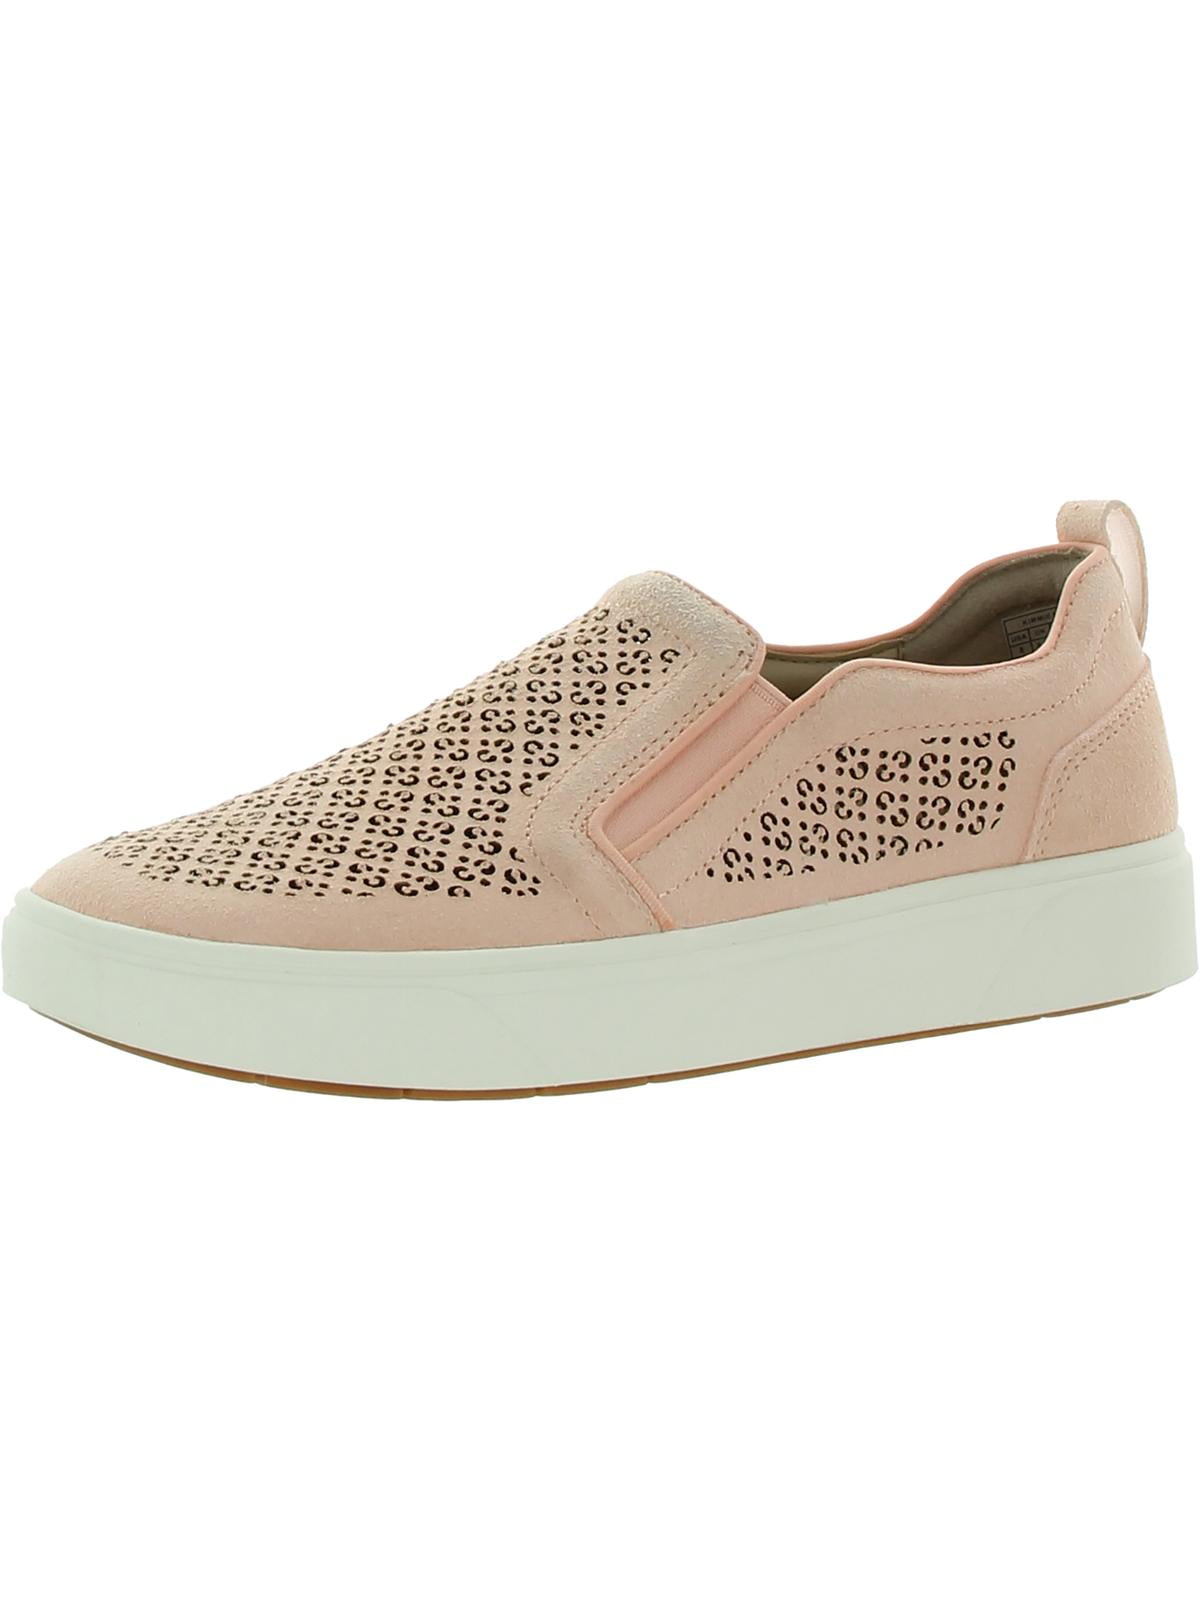 Vionic Womens Kimmie Suede Slip On Casual and Fashion Sneakers ...